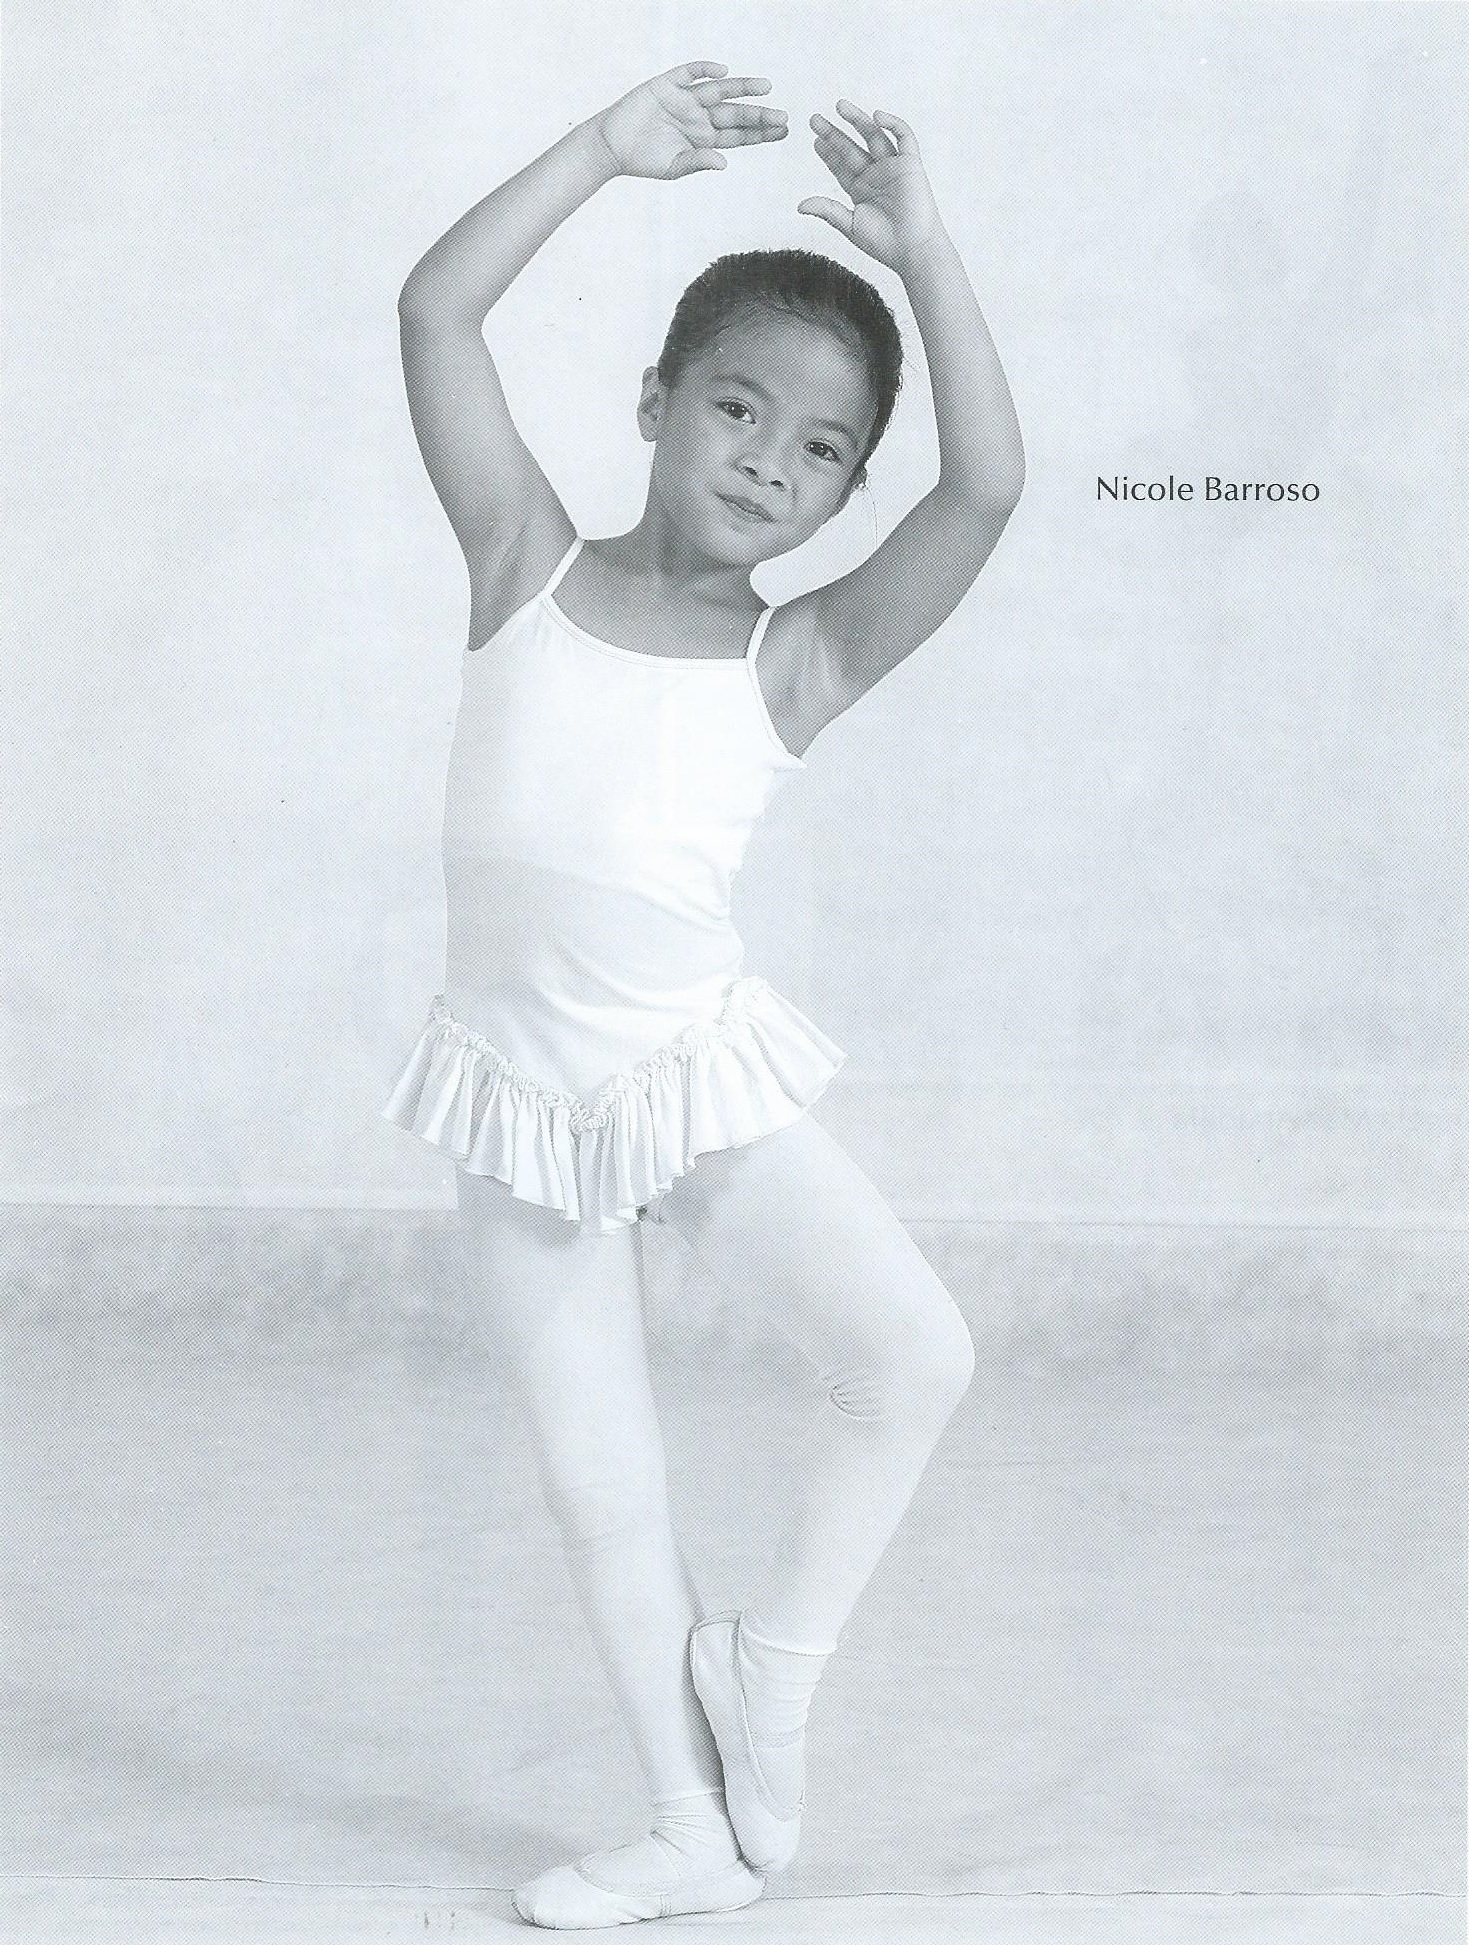 Neeka started taking Baby Ballet classes with Ballet Manila at age 5 in 2007.